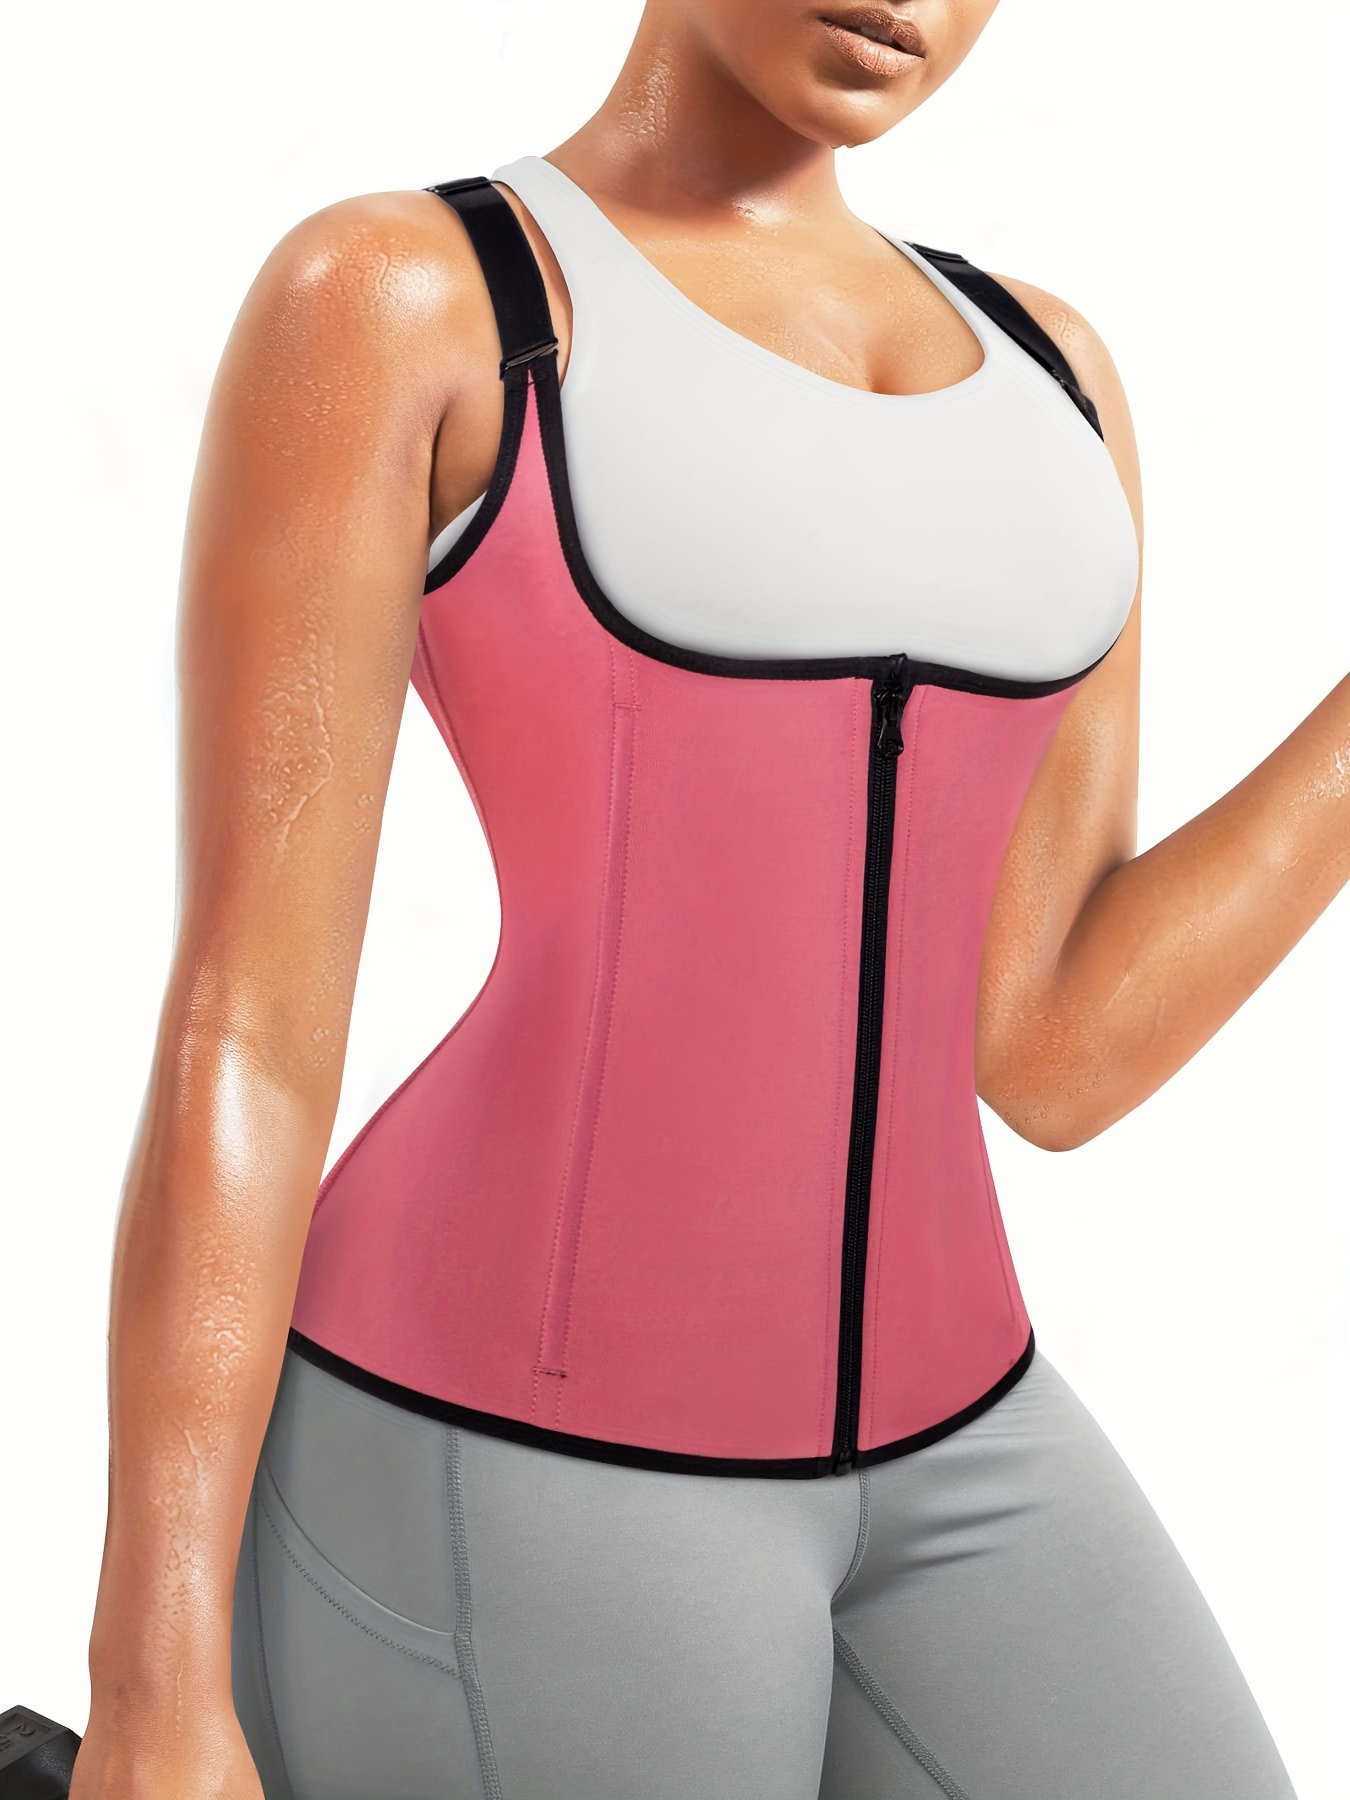 Scarboro Hot Women Neoprene Full Body Shapewear Sweat Sauna Suit Weight  Loss Body Shaper Waist Trainer Vest with Adjustable Straps(Black, Large) :  : Clothing & Accessories